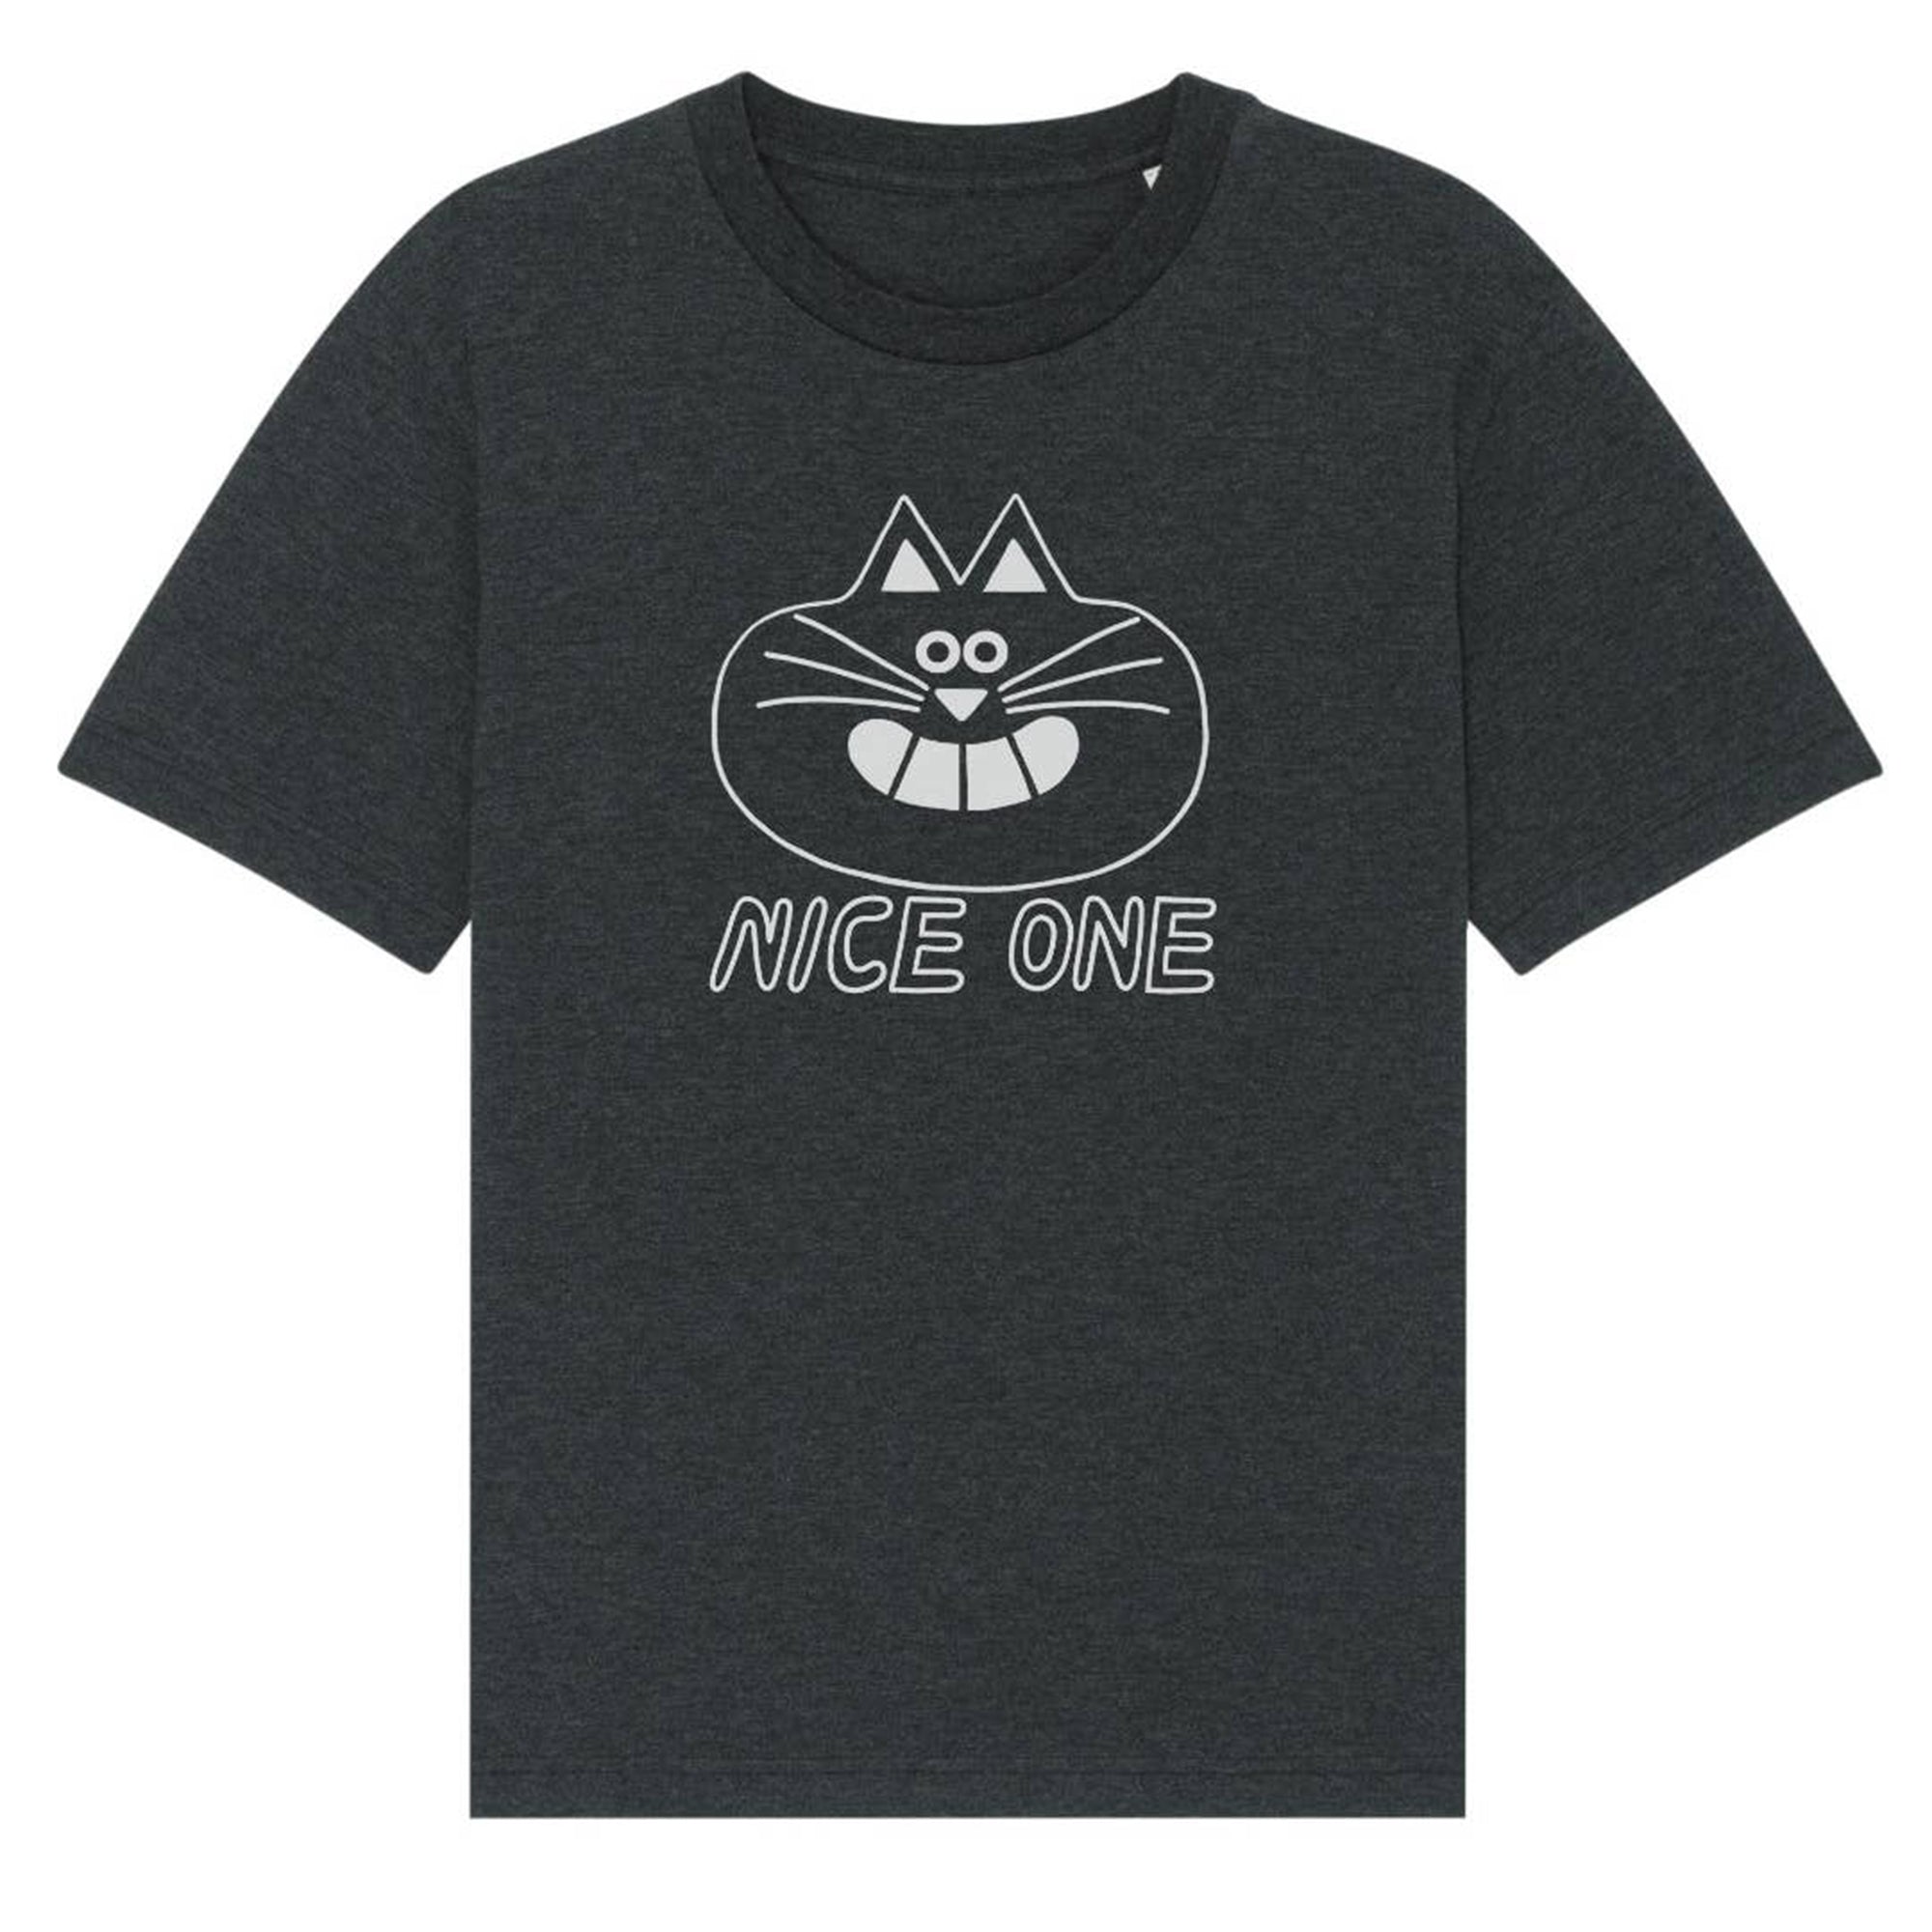 Nice One adult t-shirt